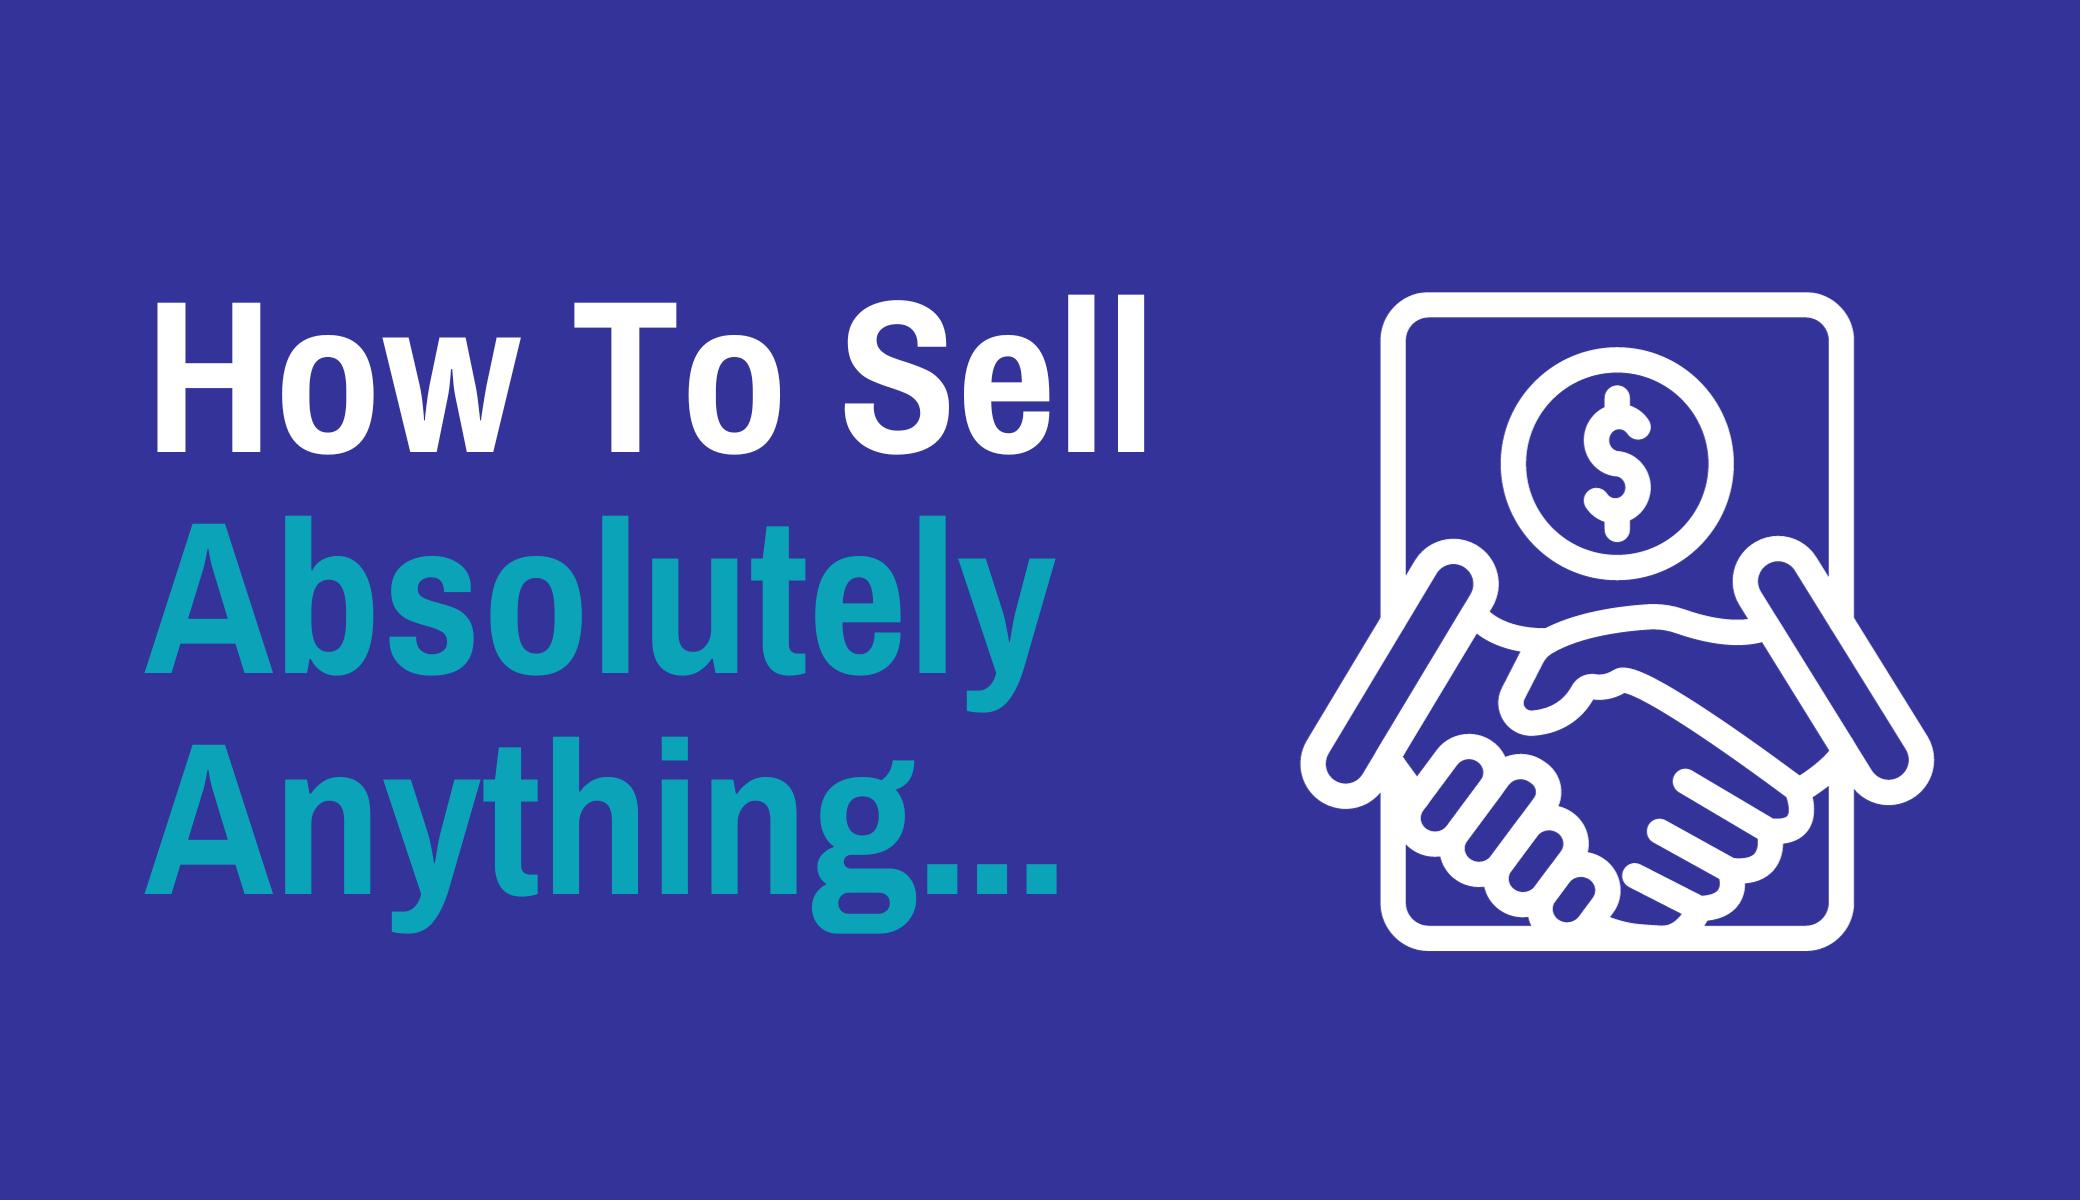 How To Sell Absolutely Anything